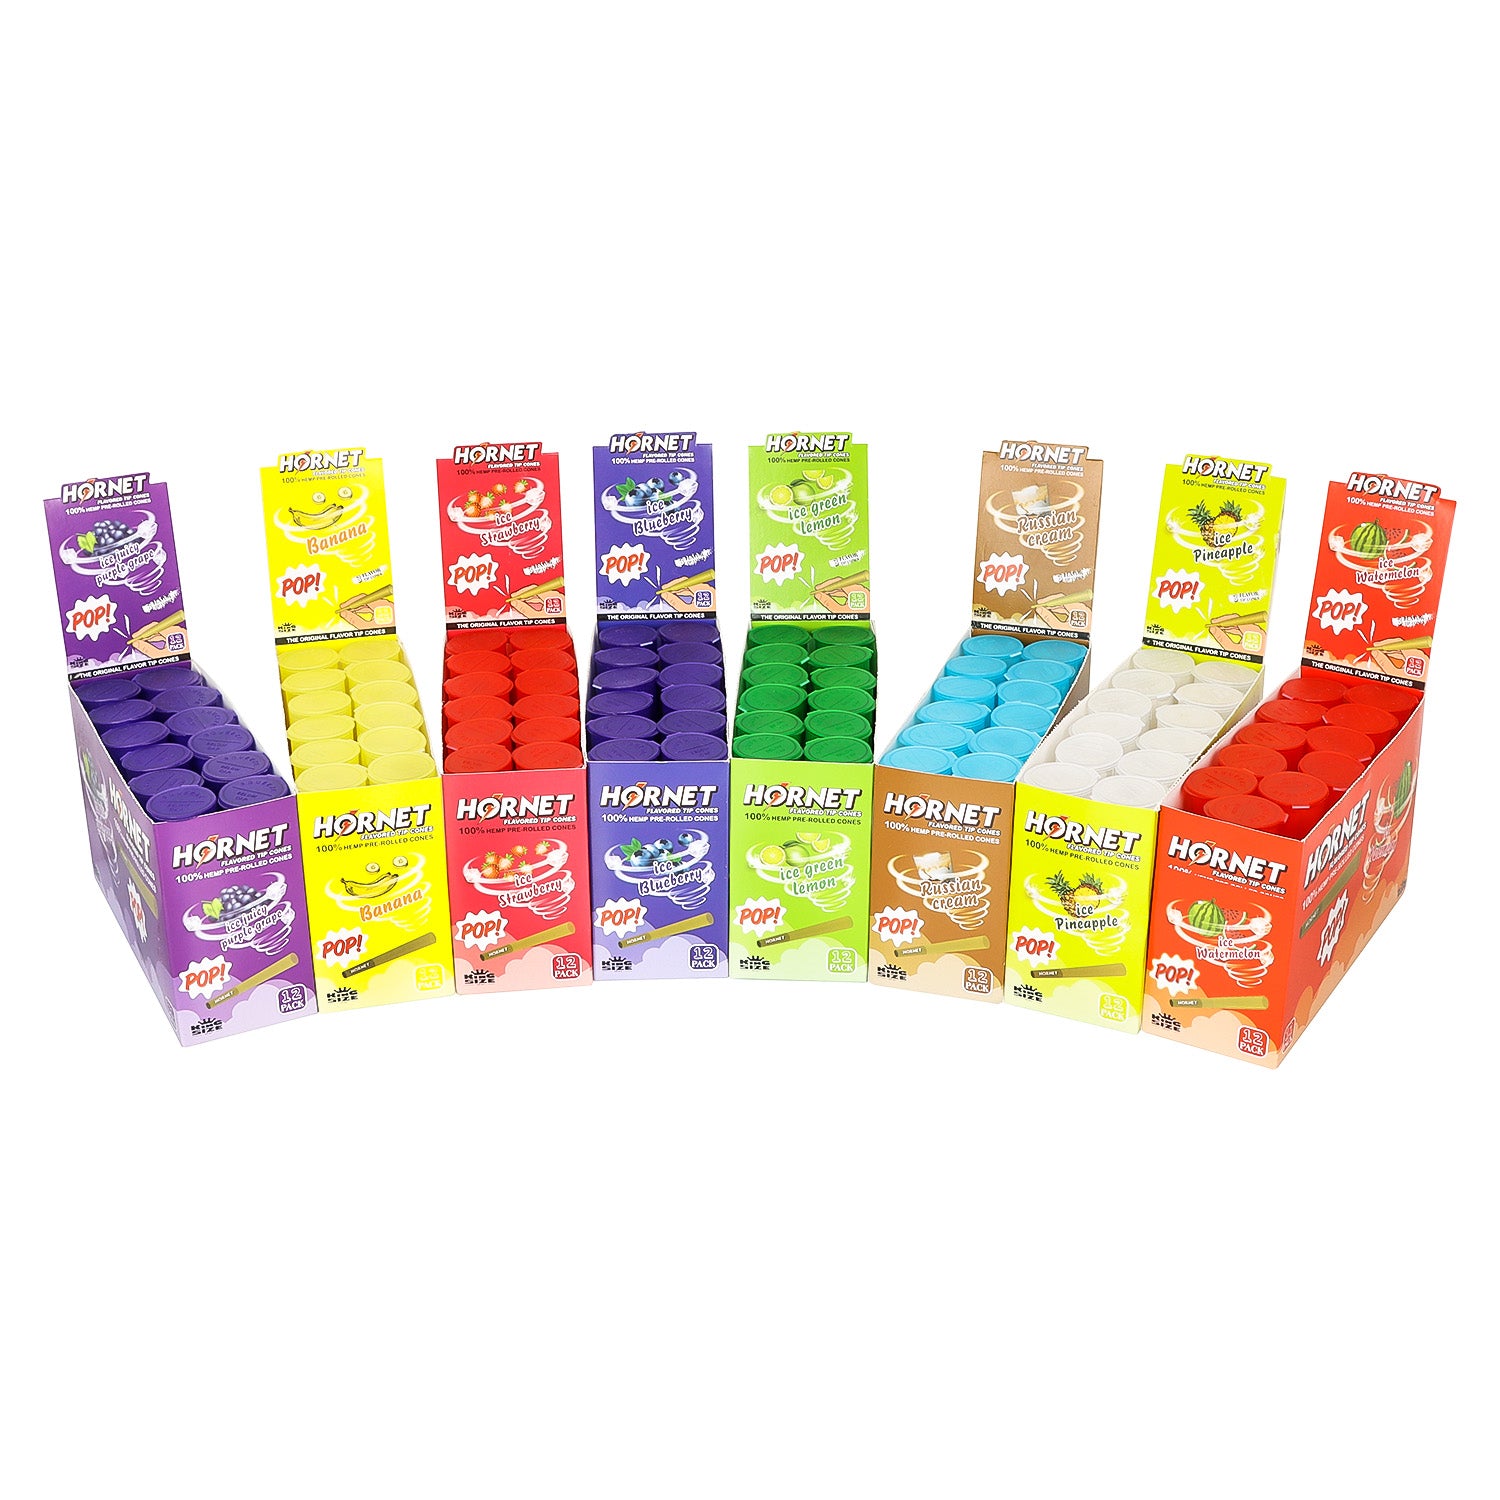 HORNET Strawberry Flavors Pre Rolled Cones, King Size Pre Rolled Rolling Paper With Tips, Slow Burning Rolling Cones & Flavored Pop, 3 PCS / Tube, 12 Tubes / Box